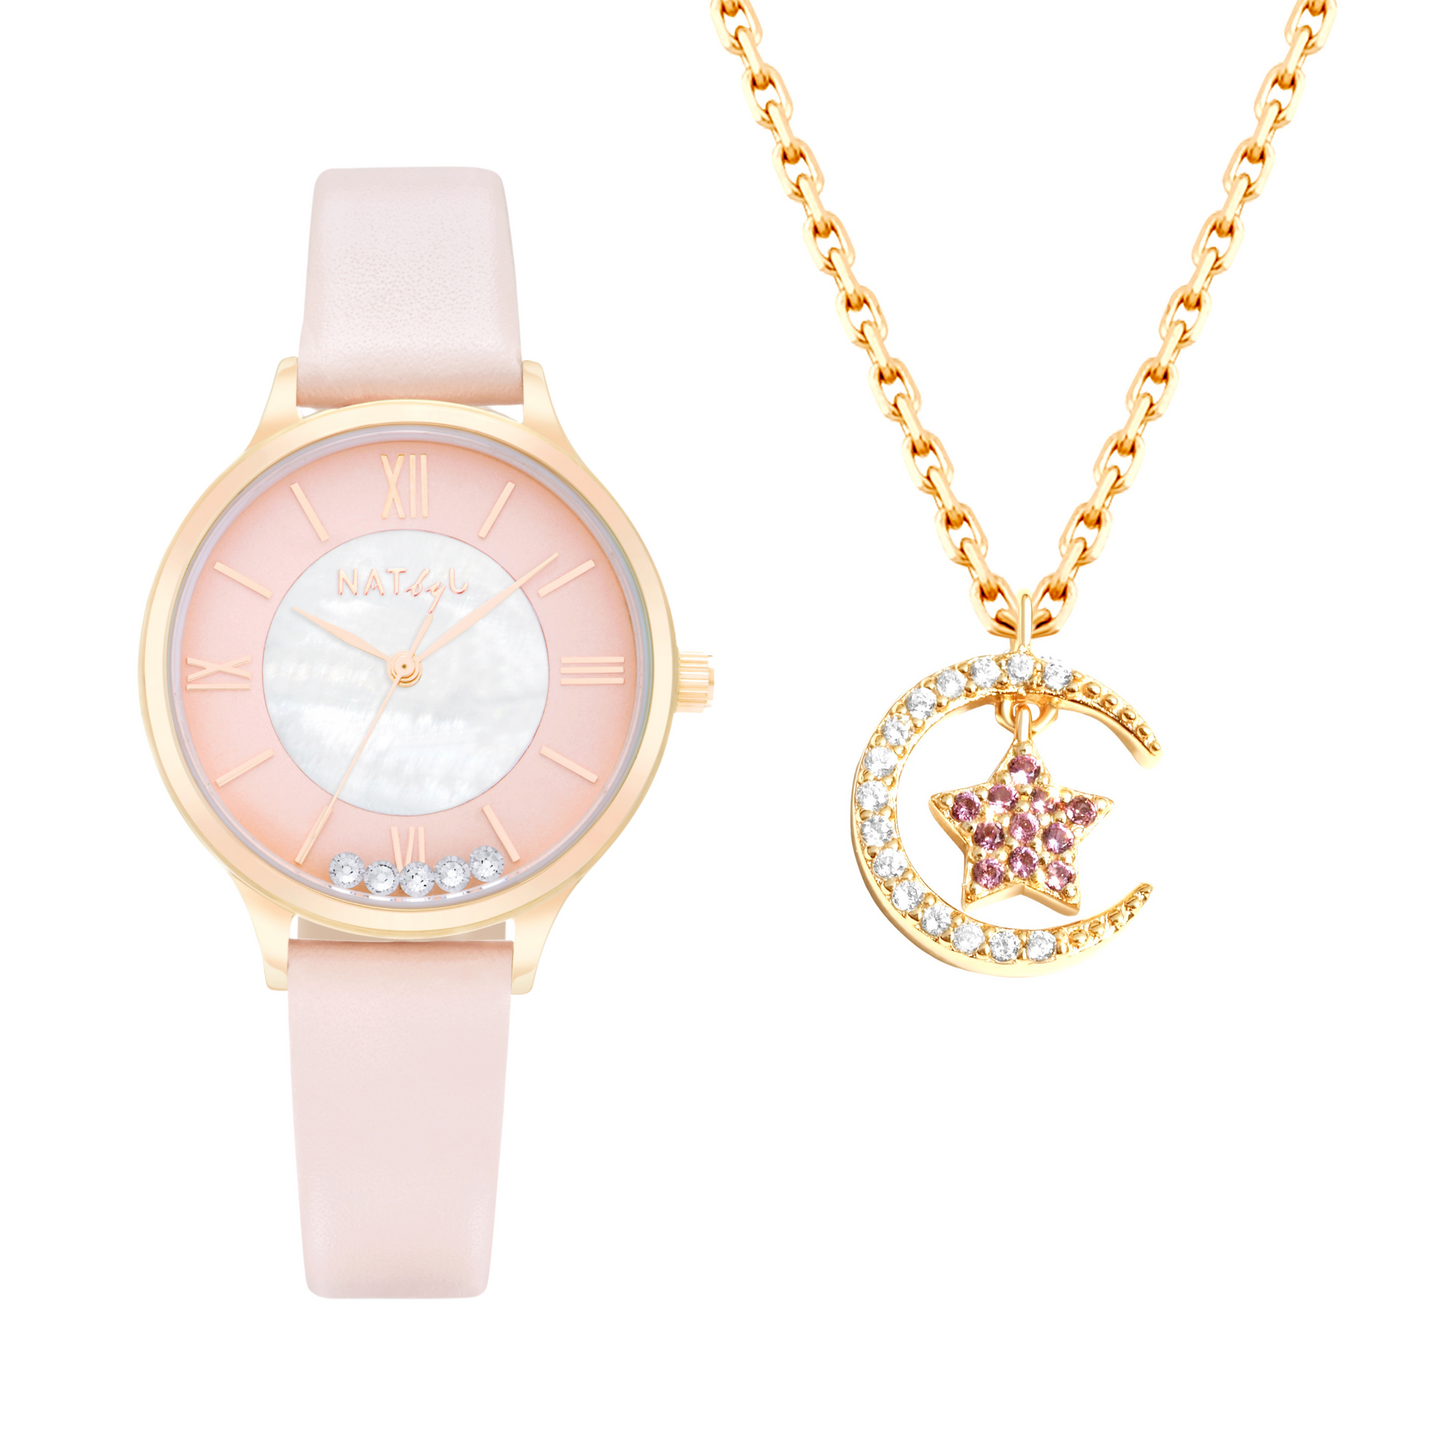 Stargaze Watch and Necklace Gift Set NAT0907N0907Y